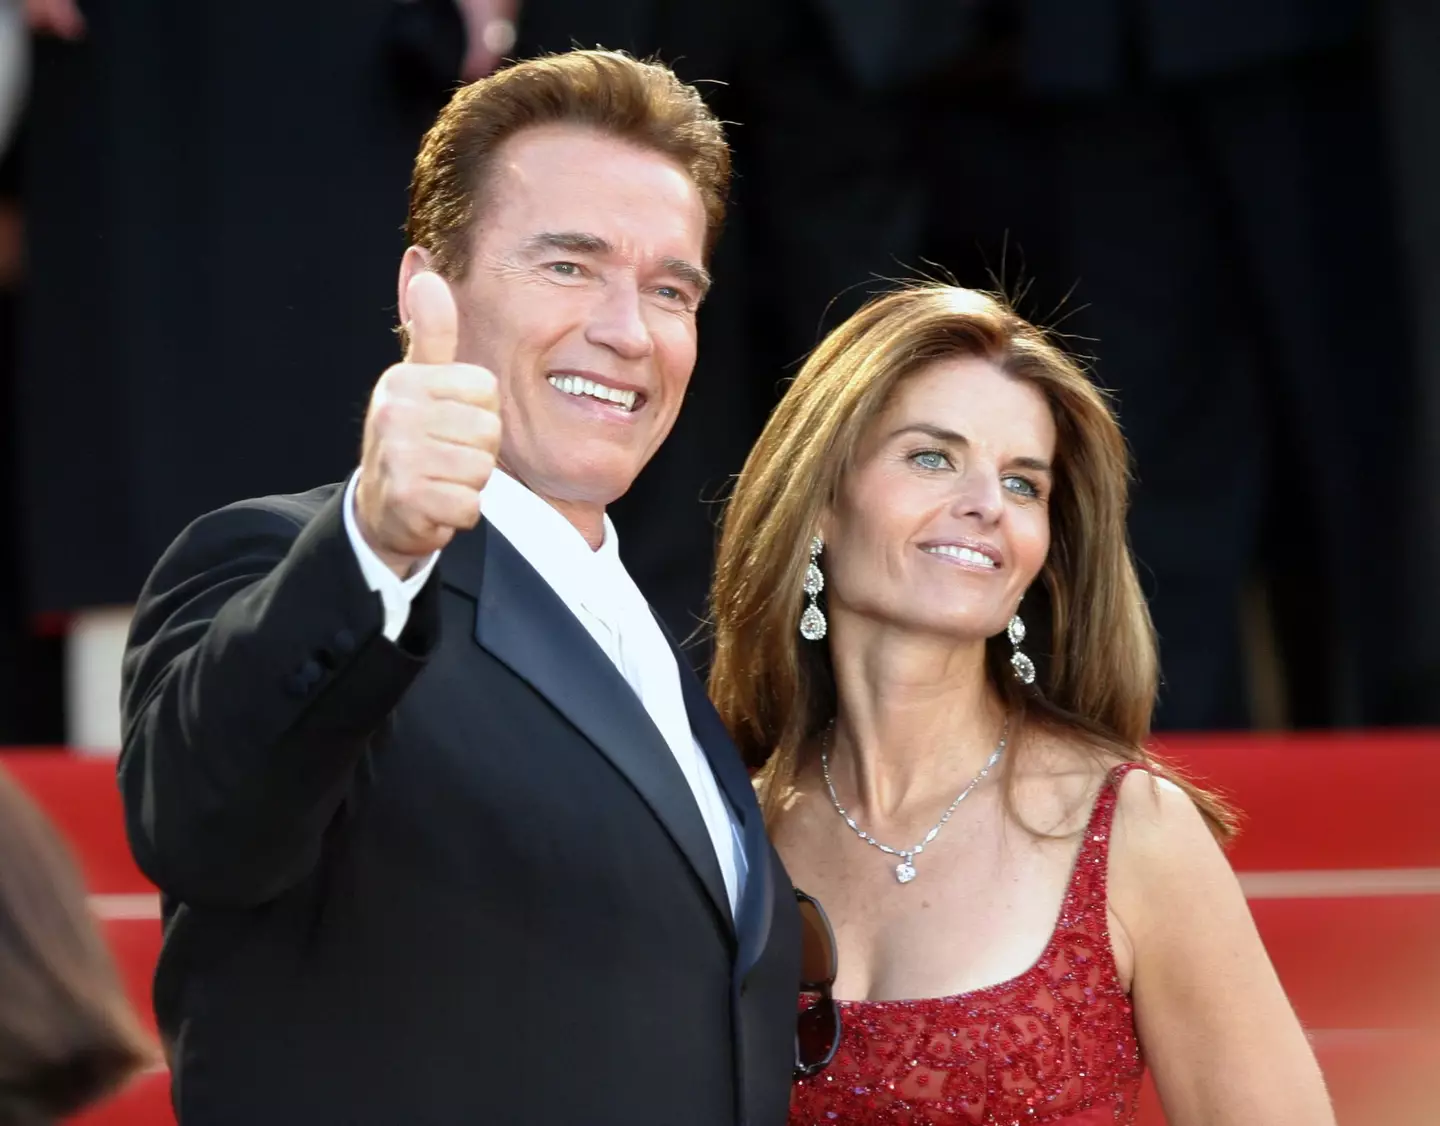 Schwarzenegger and Shriver were married for 25 years.